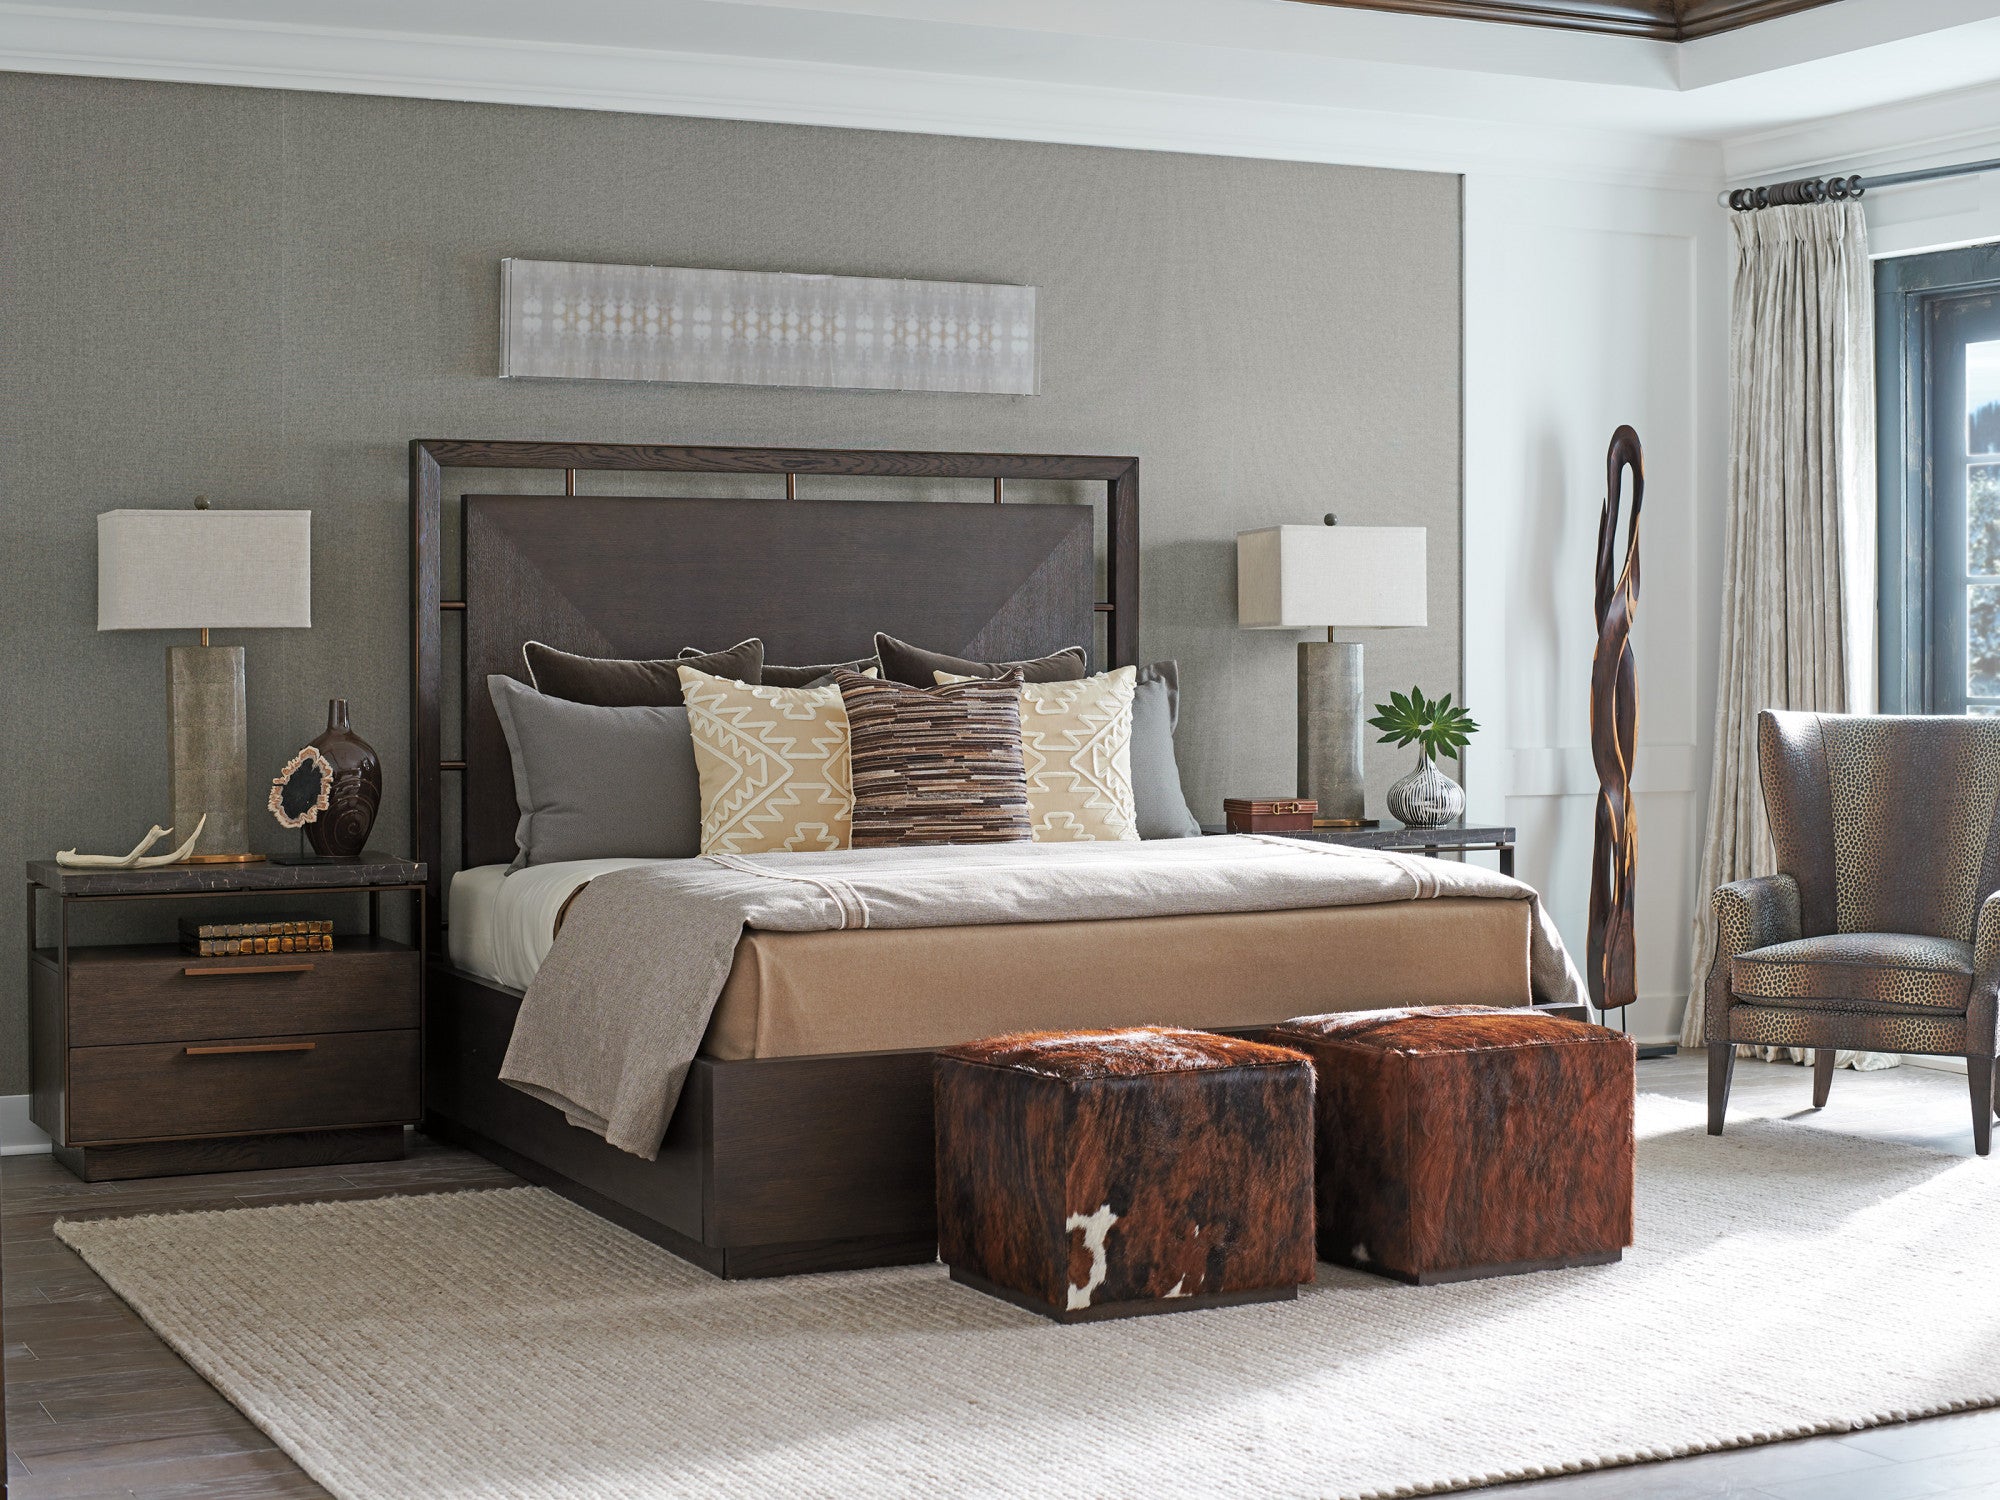 Bedroom scene from Barclay Butera's Park City collection featuring a dark wood bed with matching nightstands and hide-covered ottomans.